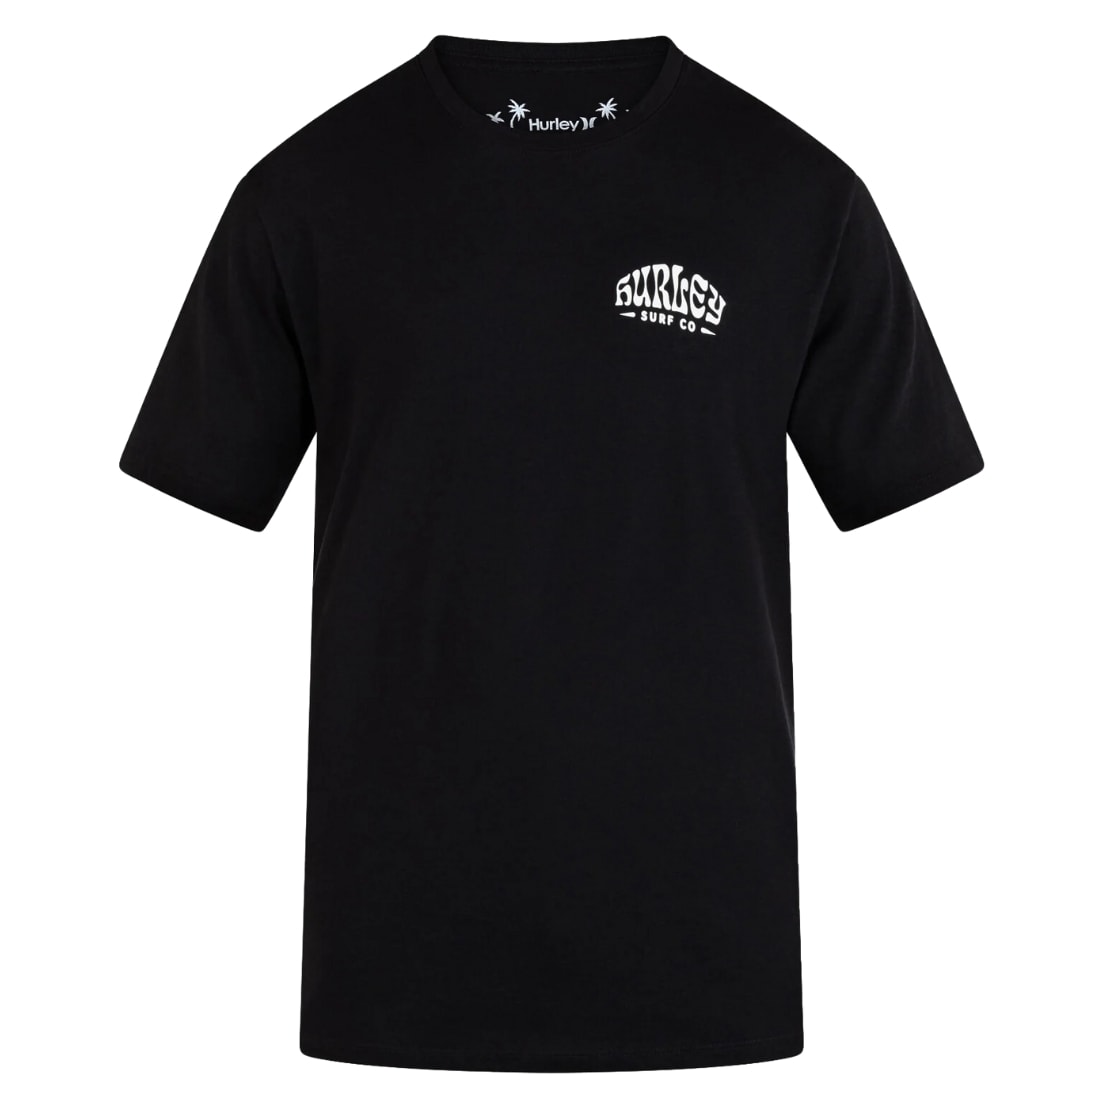 Hurley Everyday Paradise Found T-Shirt - Black - Mens Surf Brand T-Shirt by Hurley